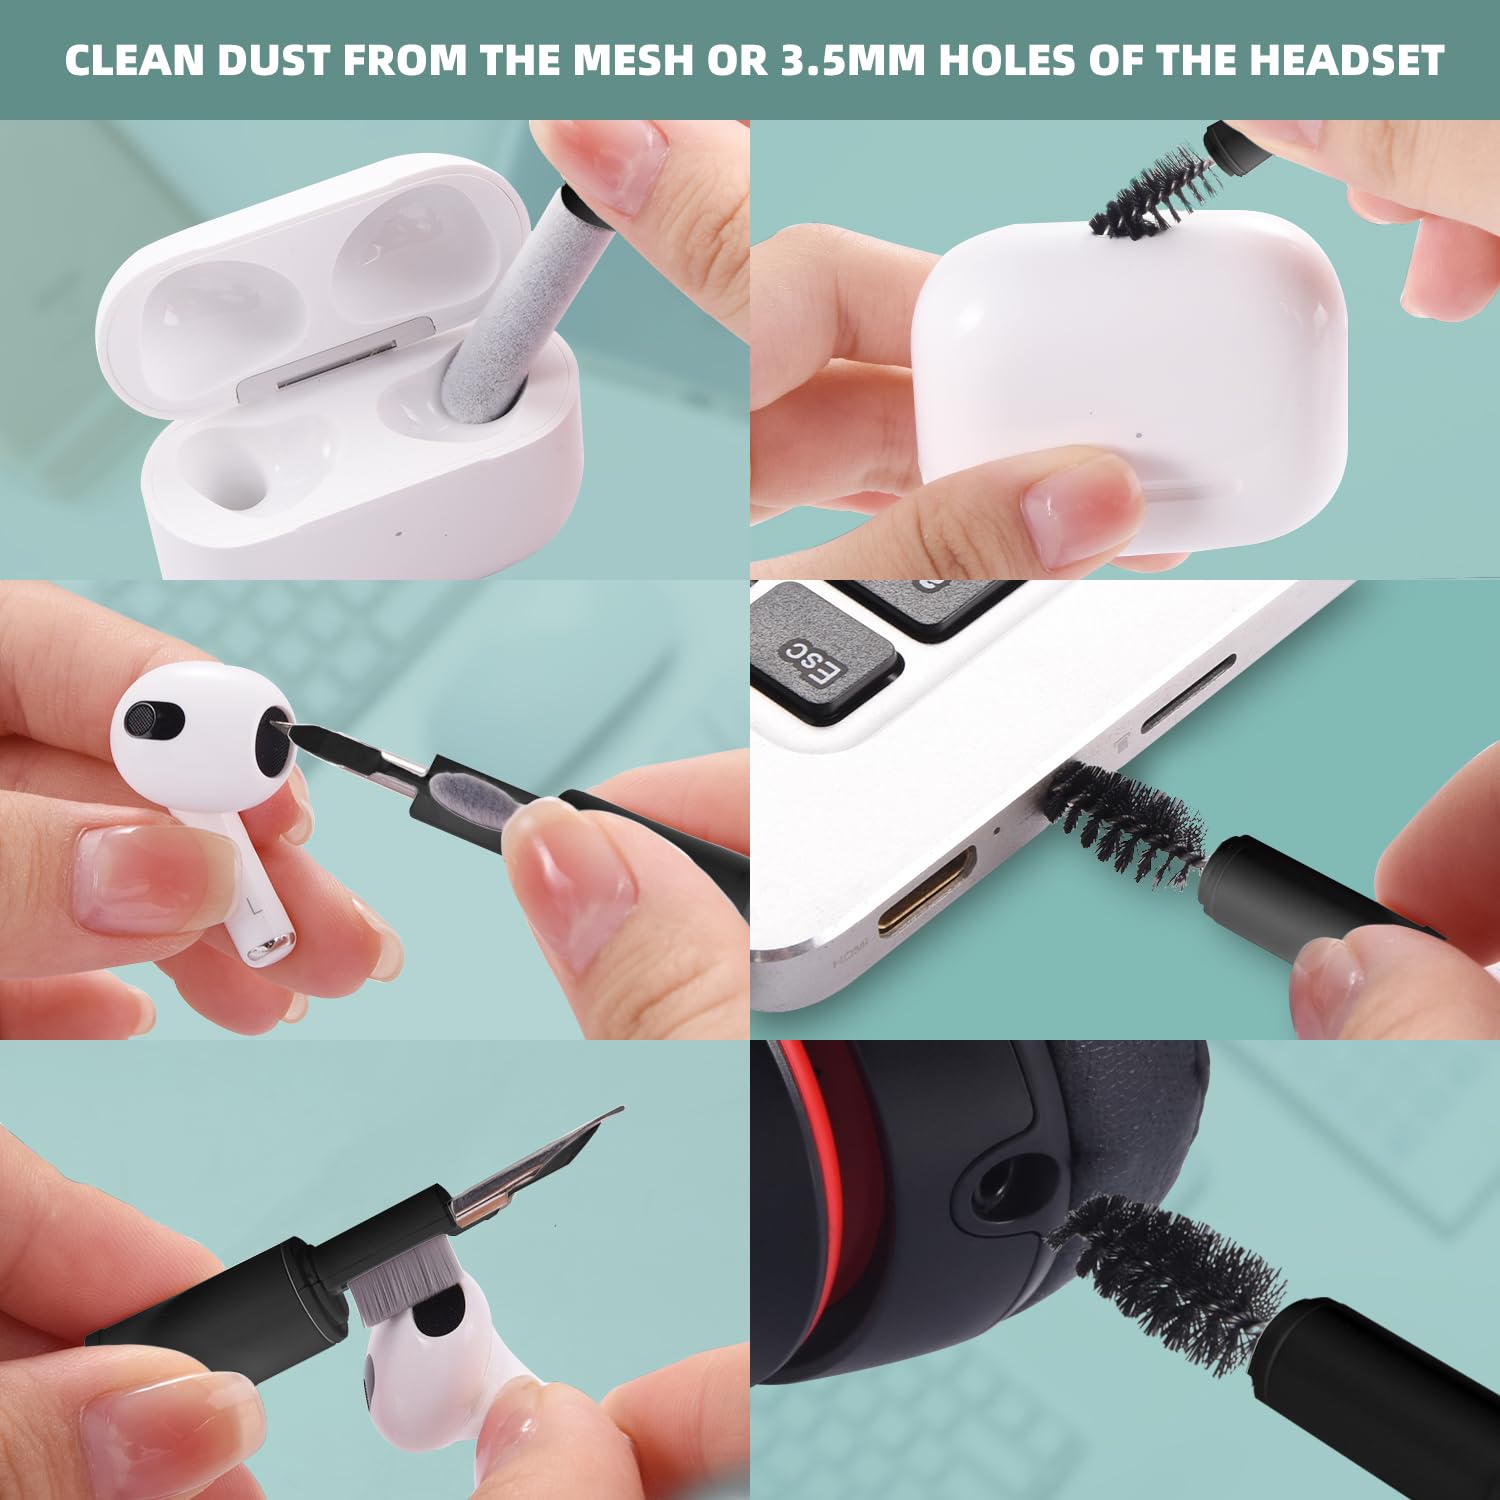 Ecasp Cleaner Kit for AirPod, Multi-Tool iPhone Cleaning Kit, Cell Phone Cleaning Repair & Recovery iPhone and iPad (Type C) Charging Port, Lightning Cables, and Connectors